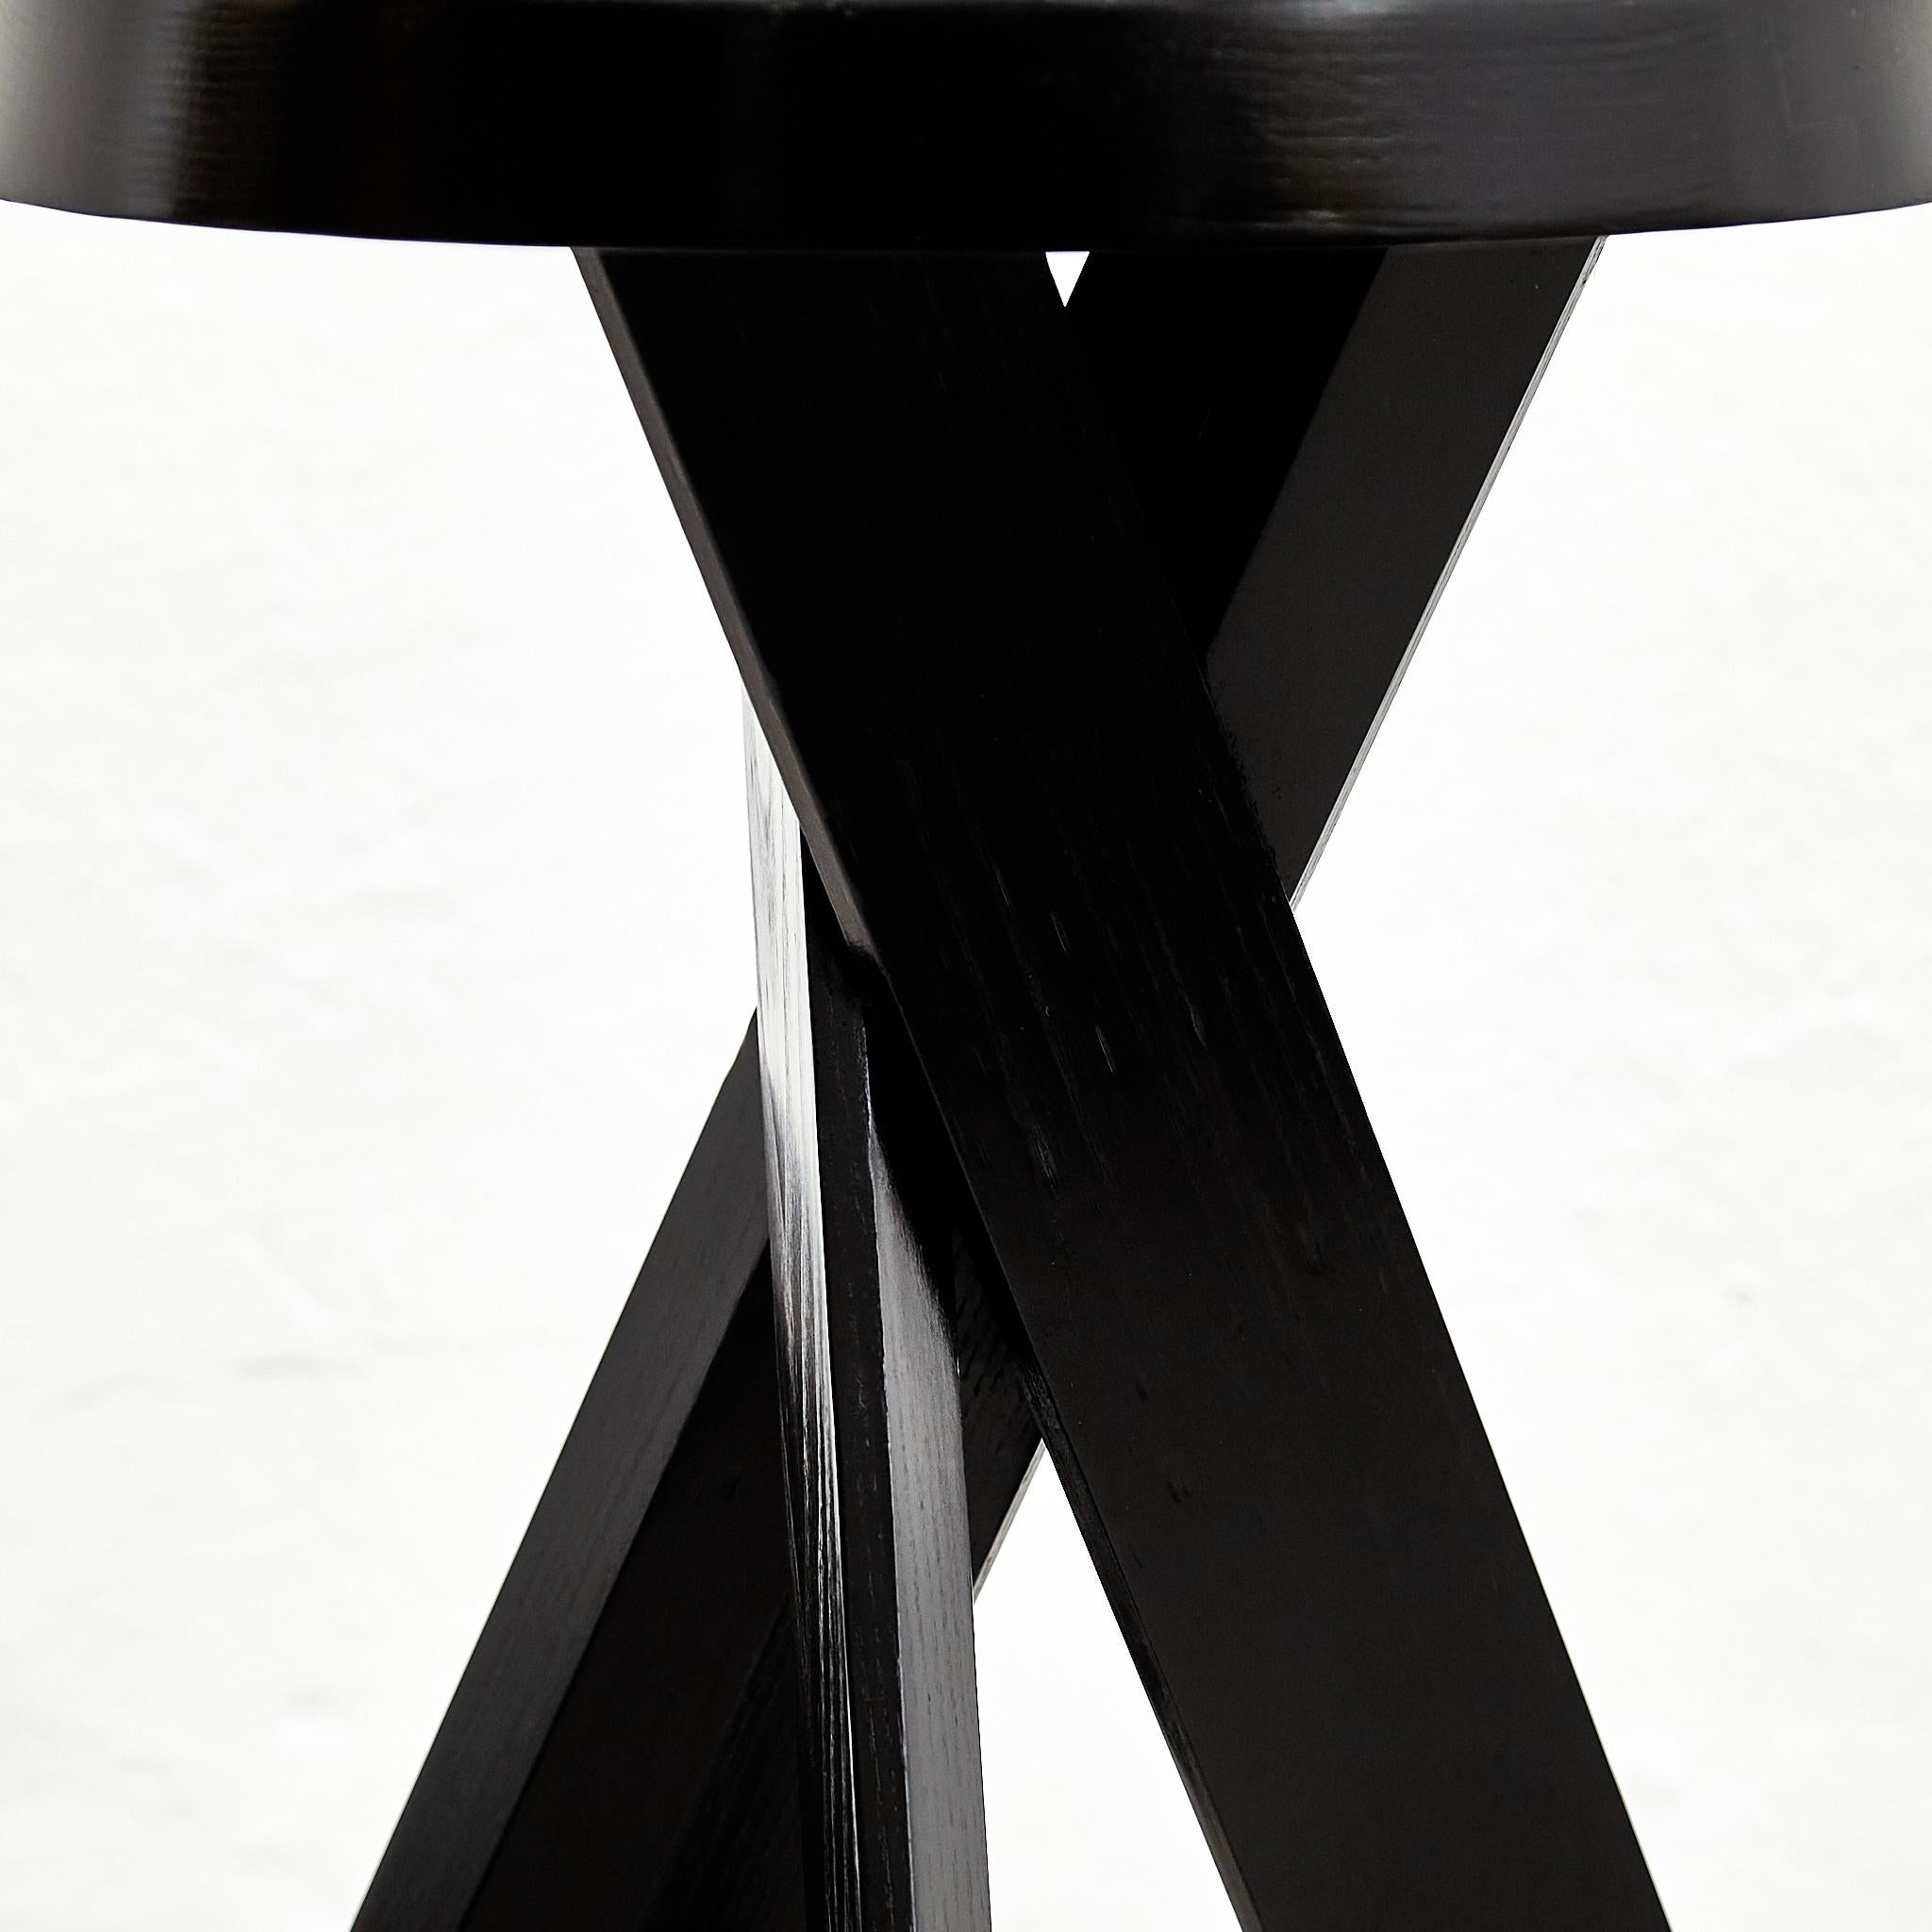 Contemporary Exclusive Pierre Chapo S31b Black Edition Stool, a Timeless French Masterpiece